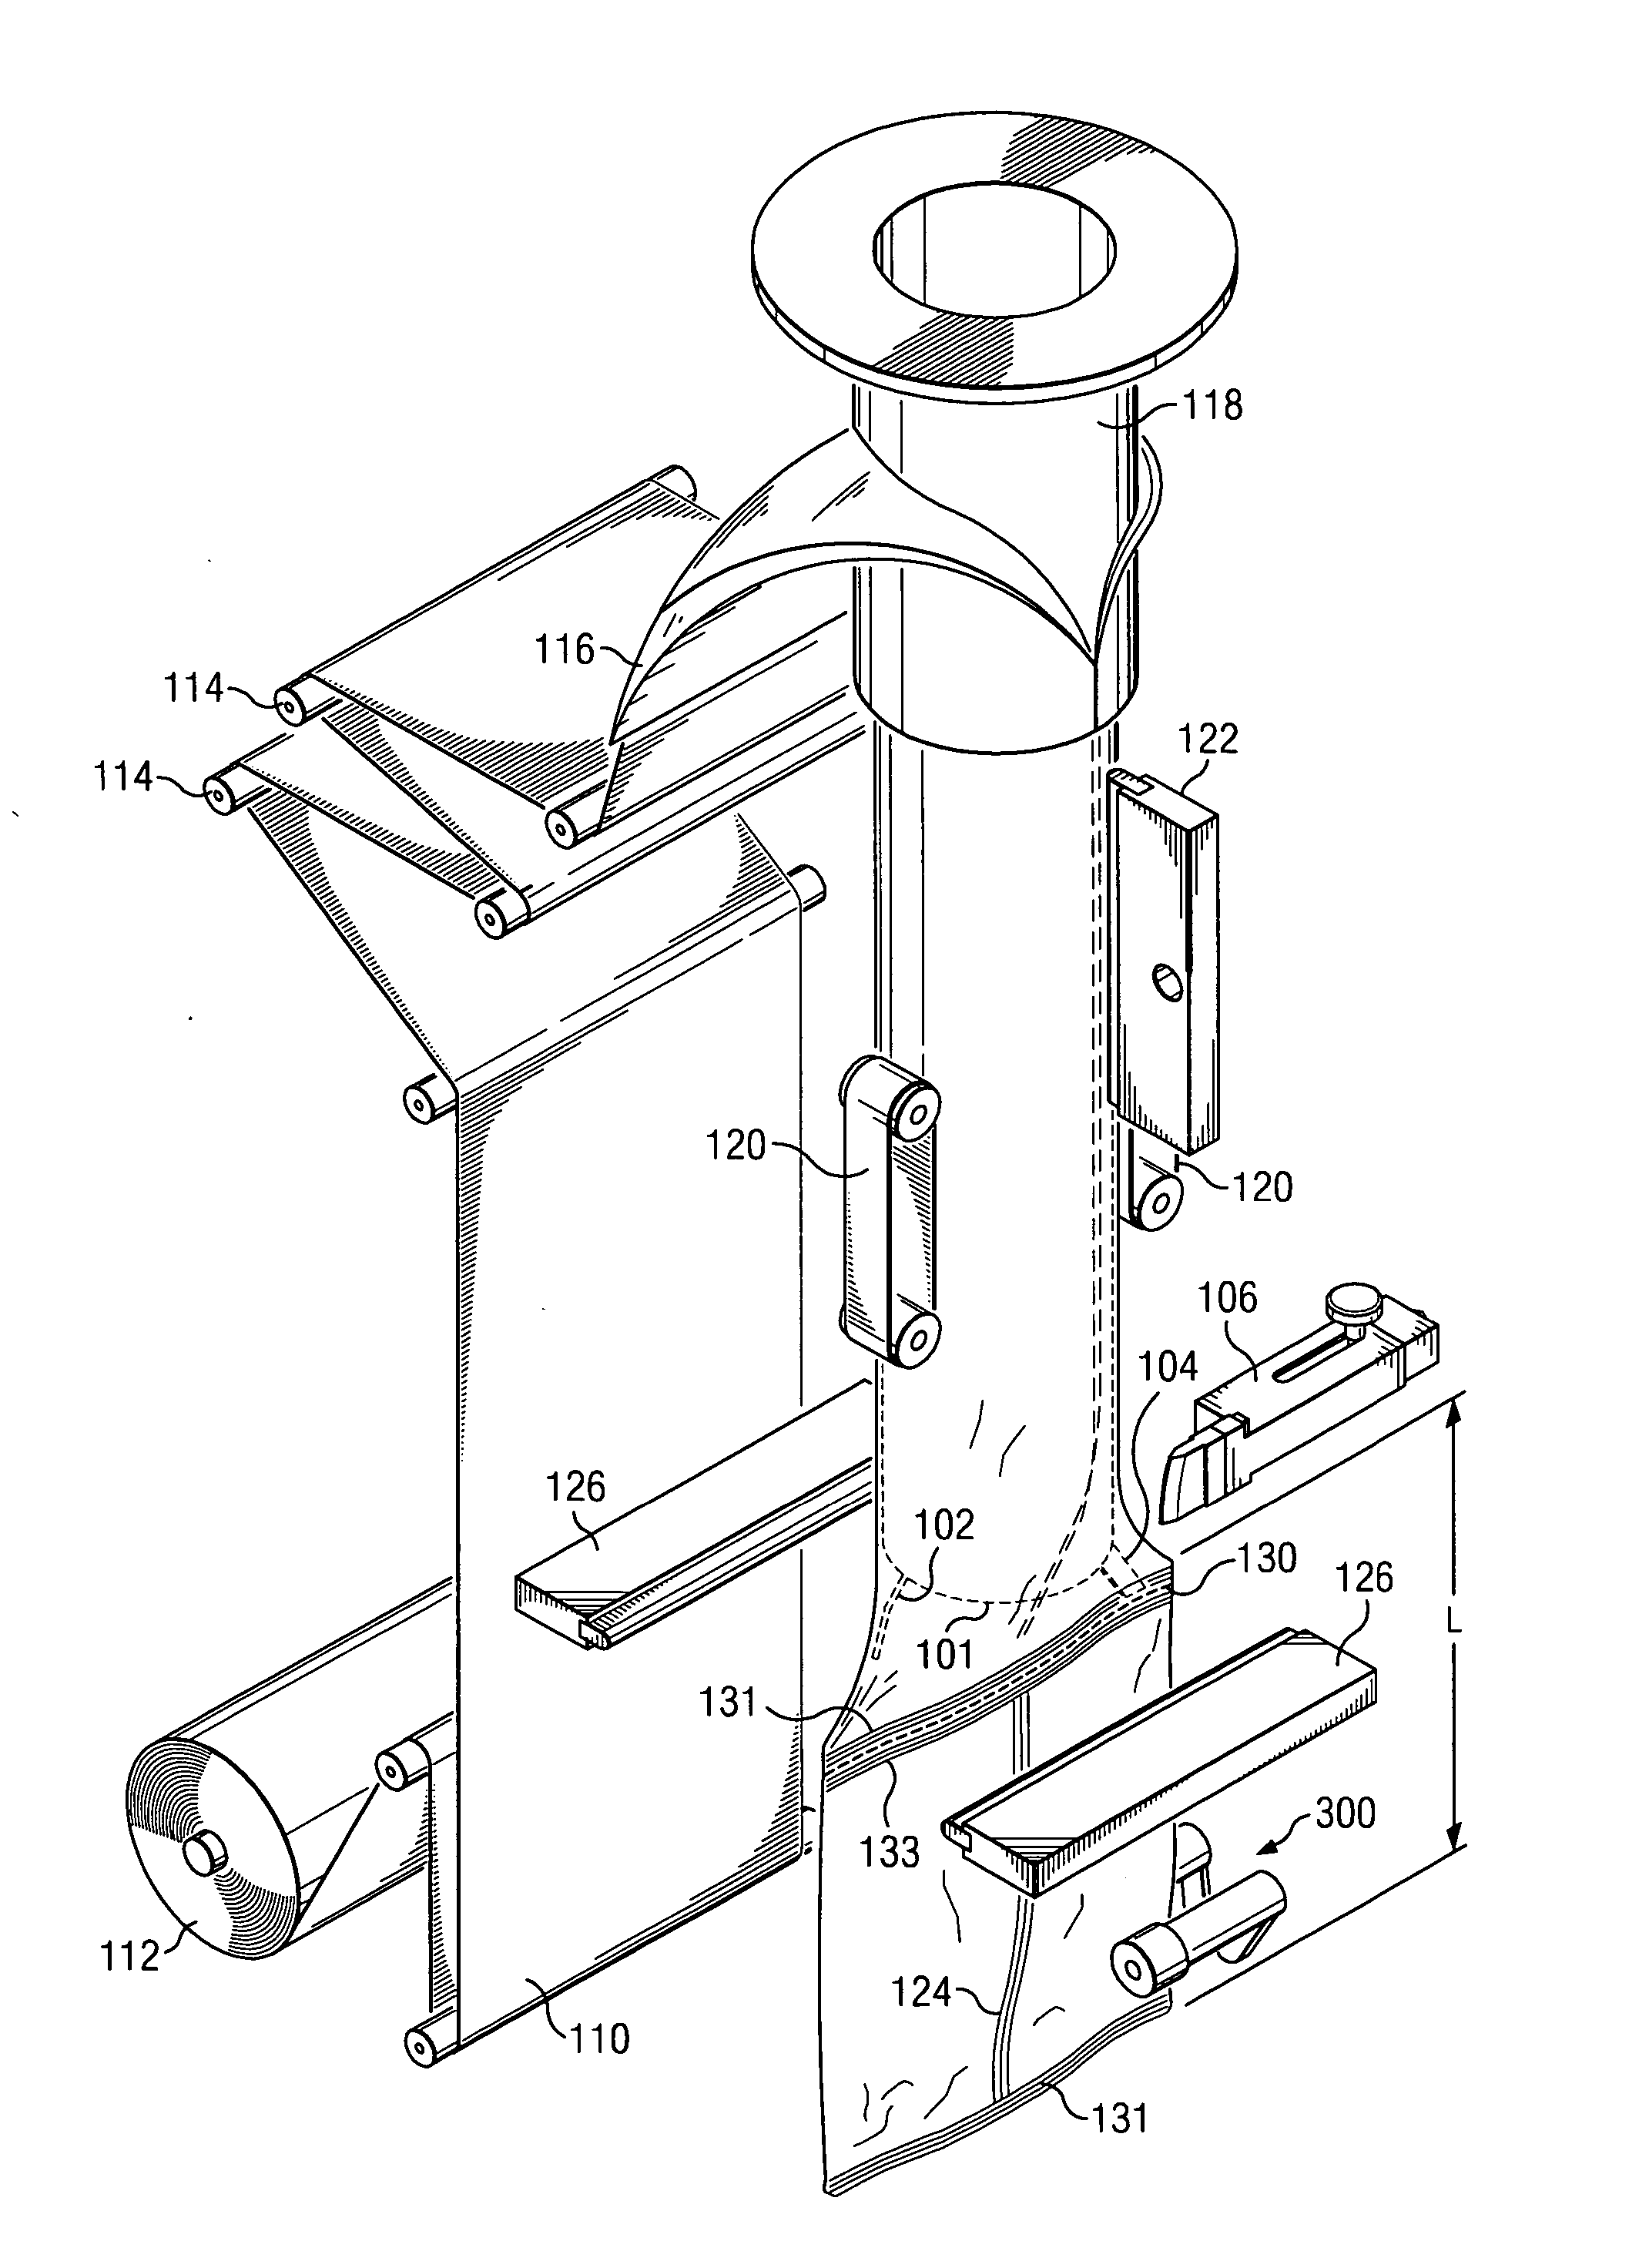 Method and apparatus for providing end seals on vertical stand-up packages